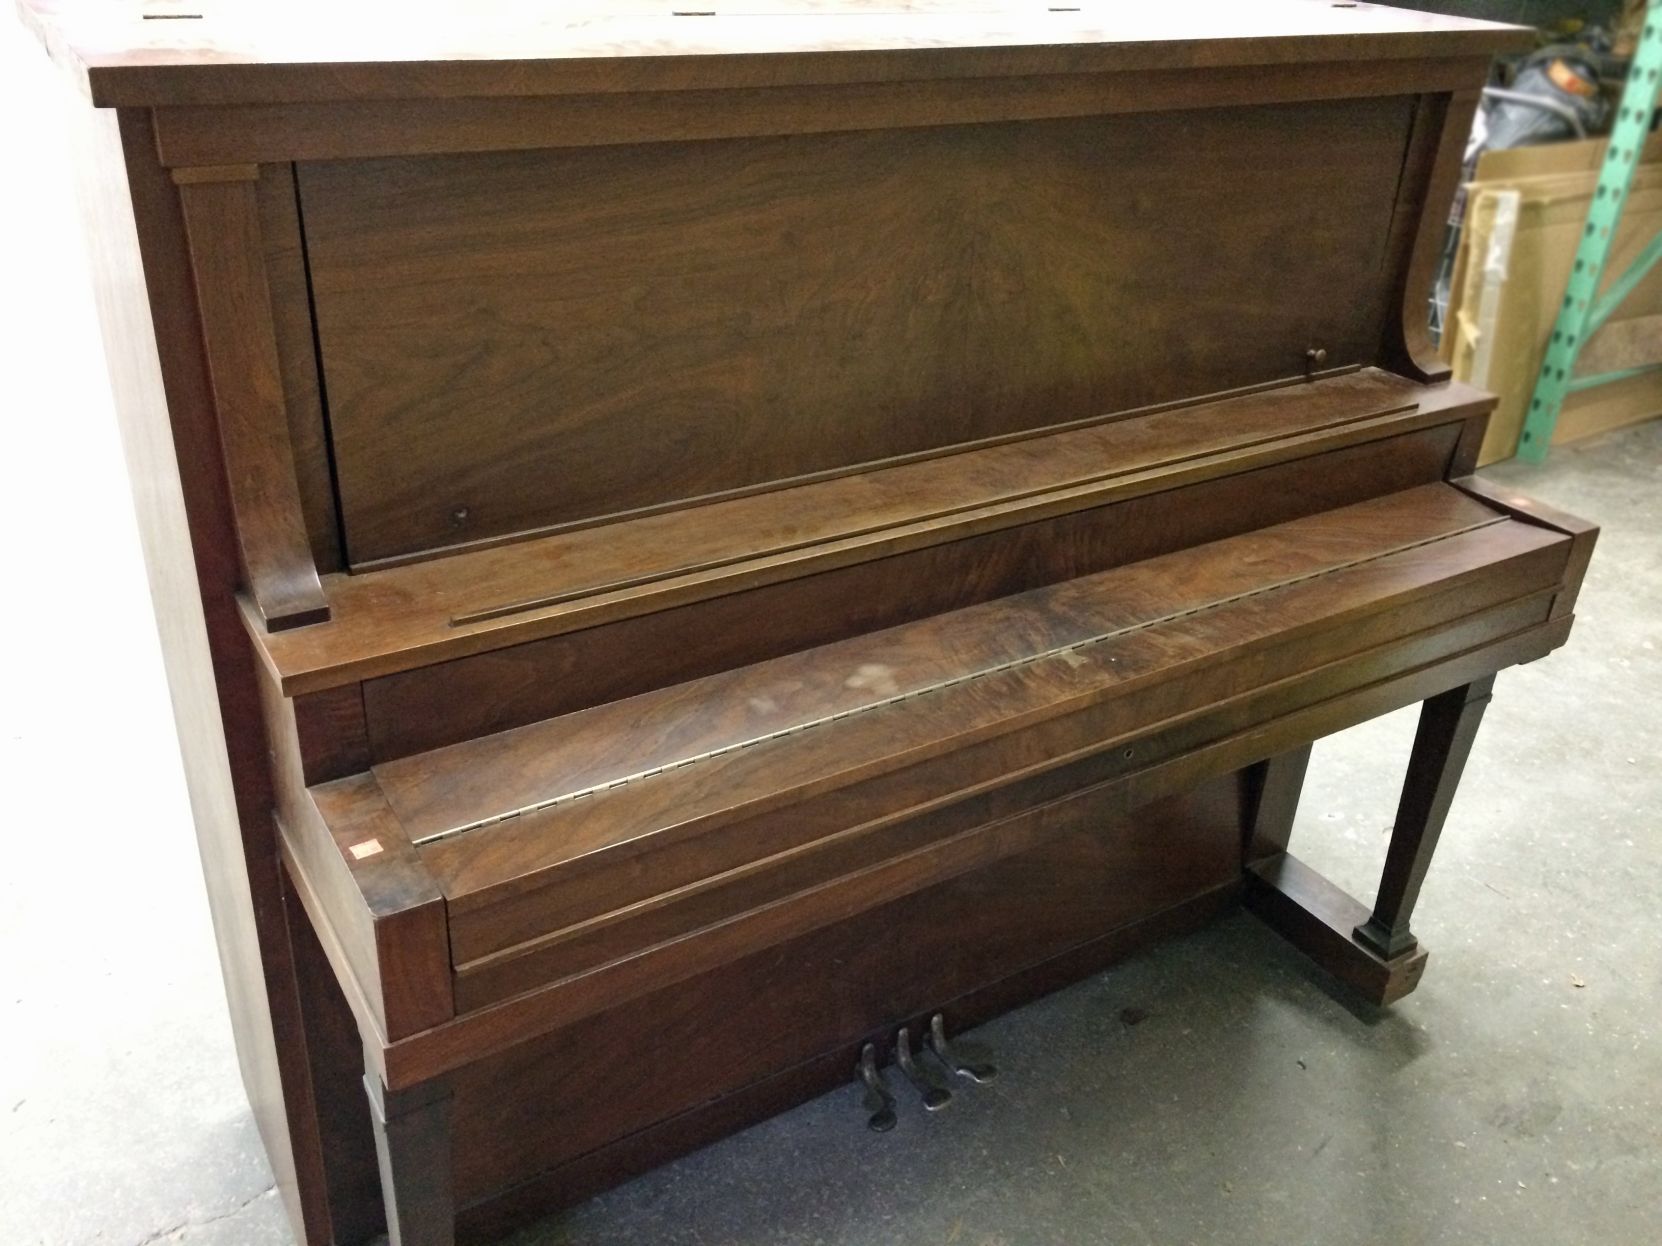 krakauer brothers piano serial numbers